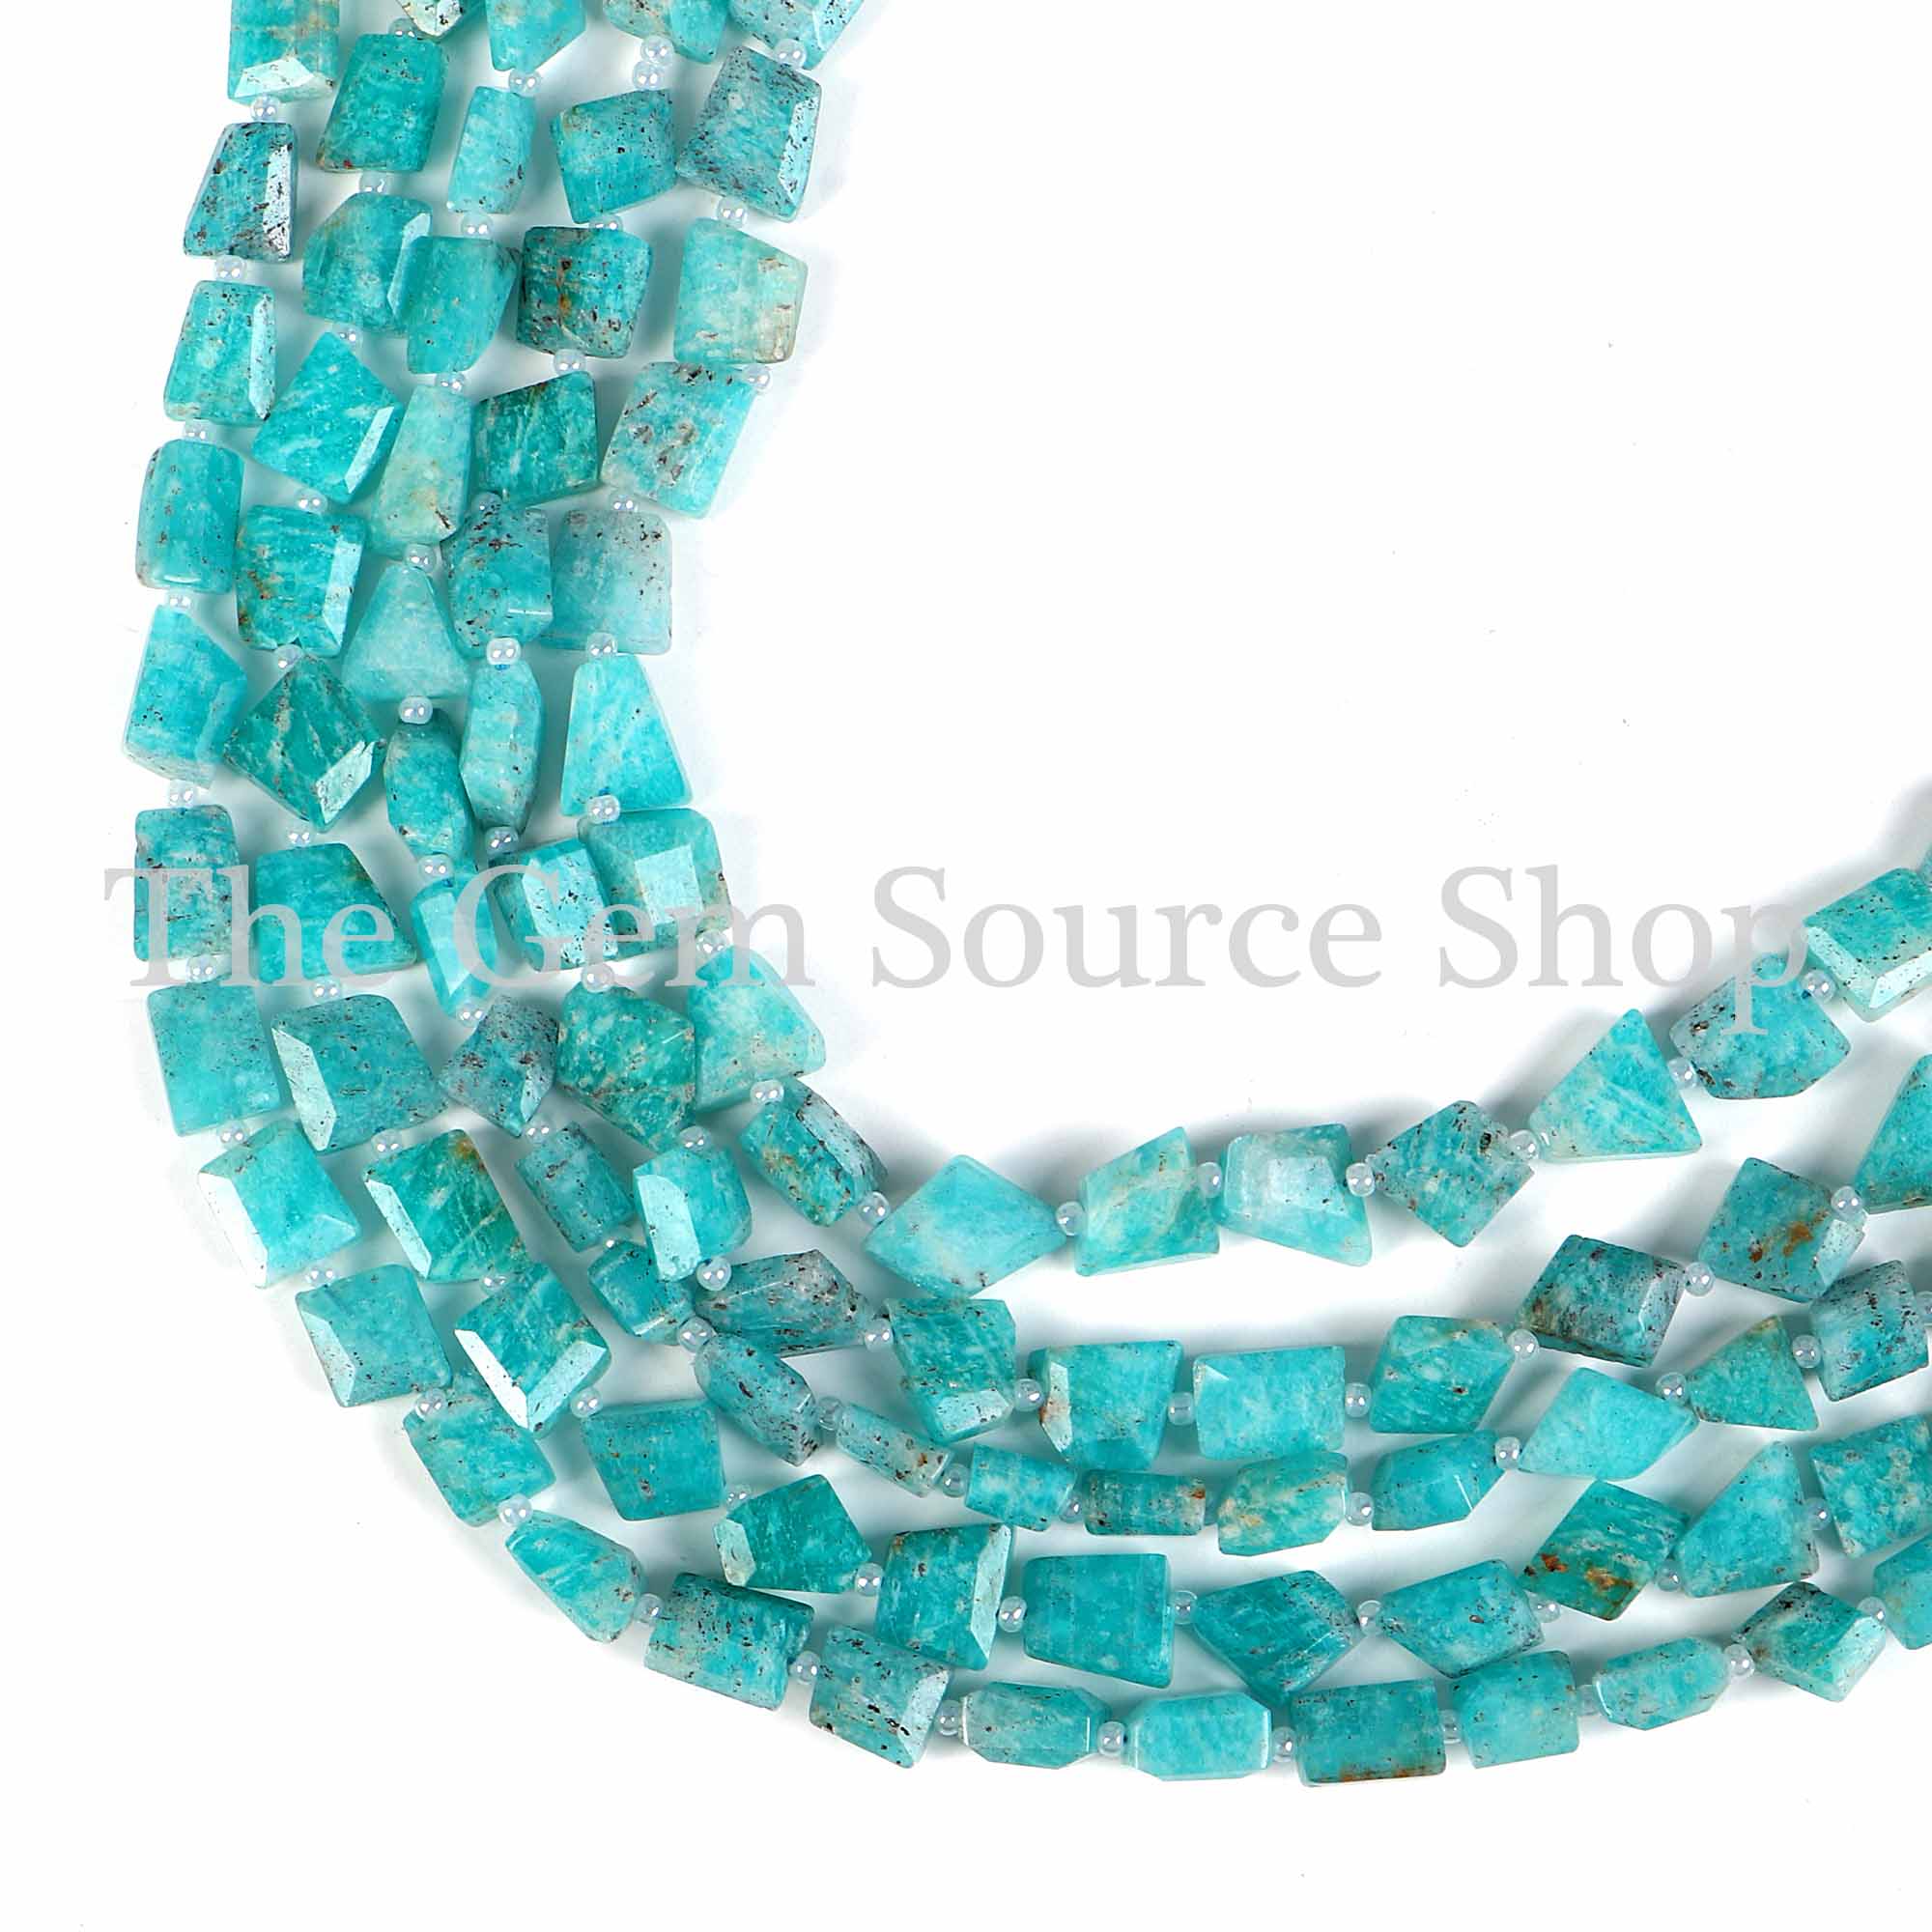 Amazonite Beads, Amazonite Nugget Beads, Amazonite Faceted Nugget Beads, Gemstone Beads